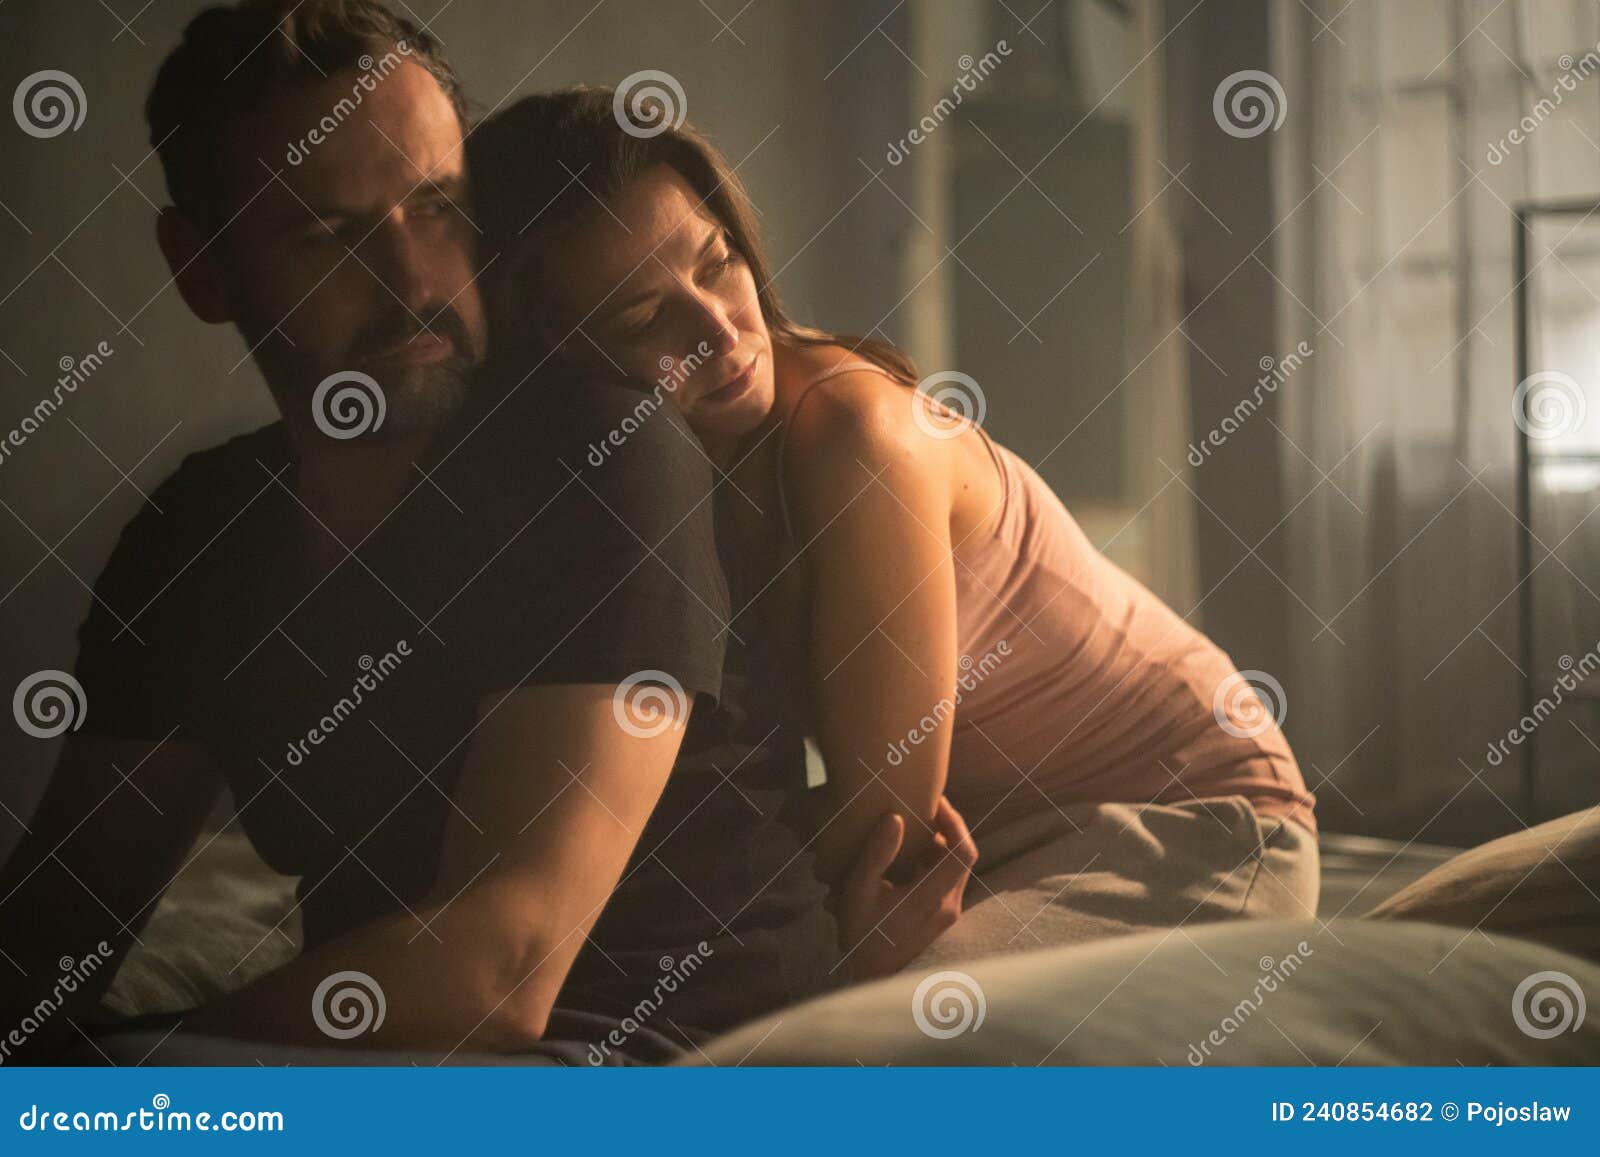 Sad Mature Man is Looking Down, Thinking about Cheating His Wife, while His Wife is Snuggling To Him Stock Photo picture